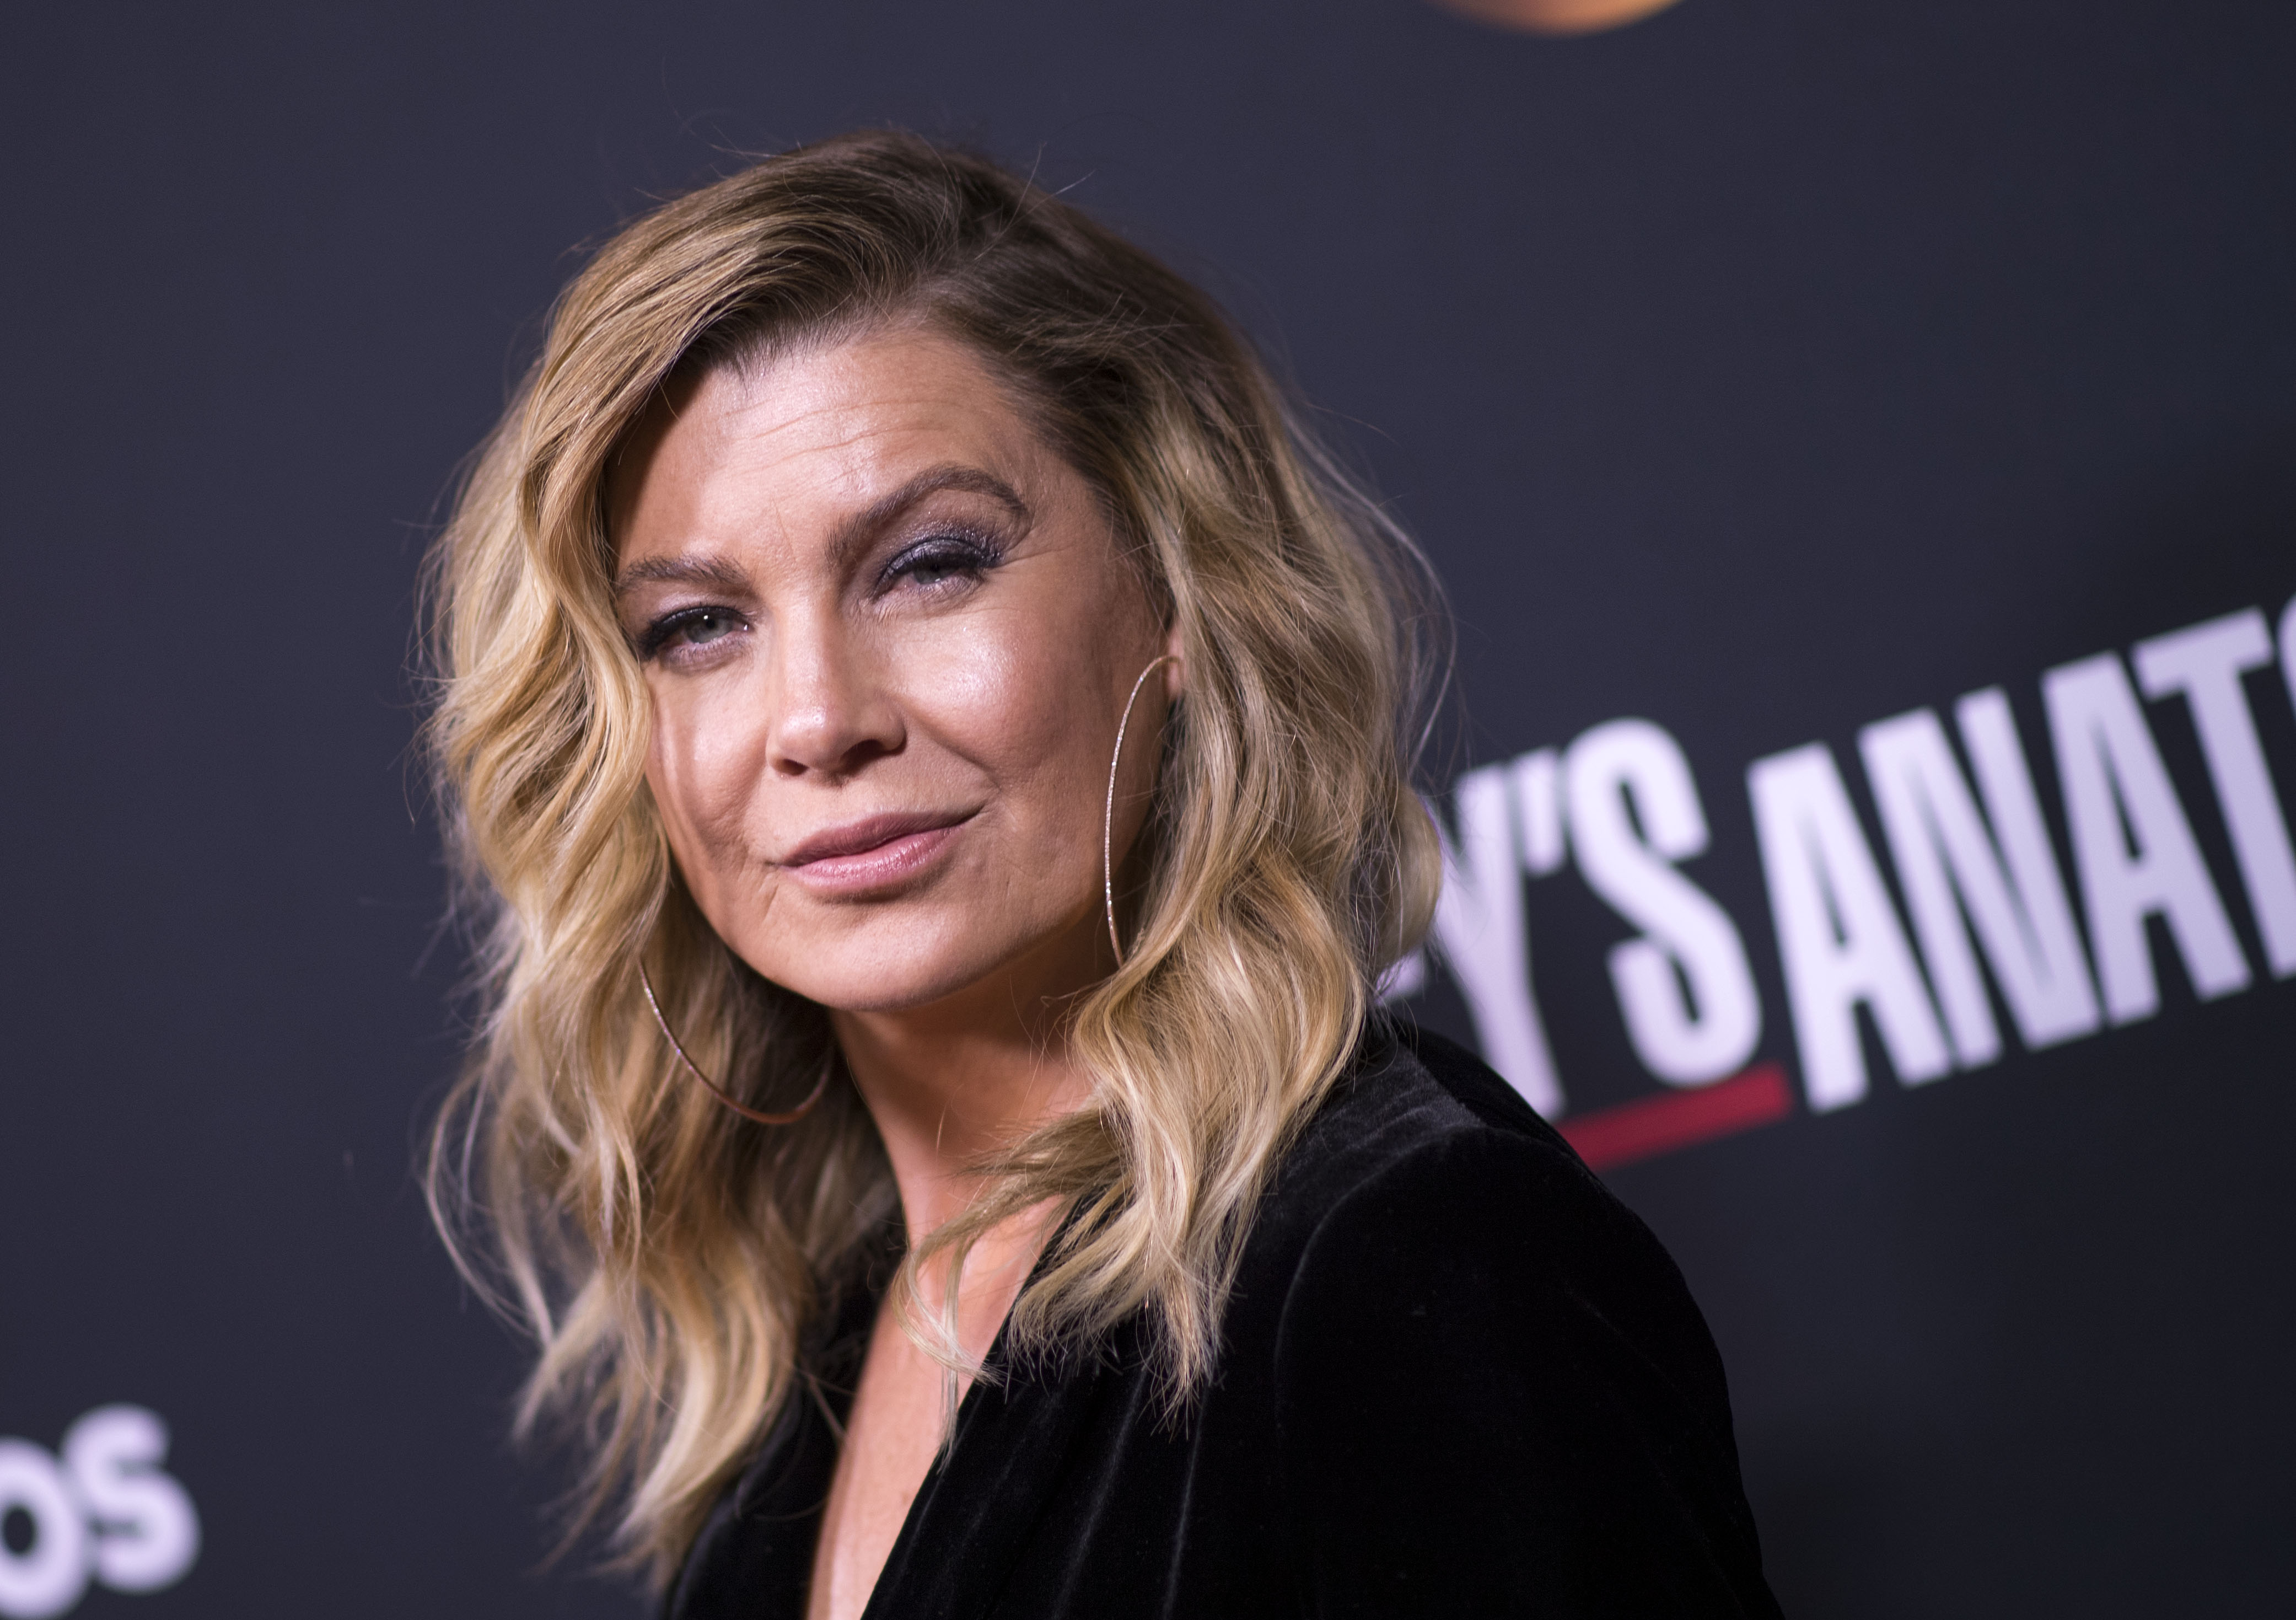 'Grey's Anatomy' star Ellen Pompeo smirking as she looks at the camera while attending an event.